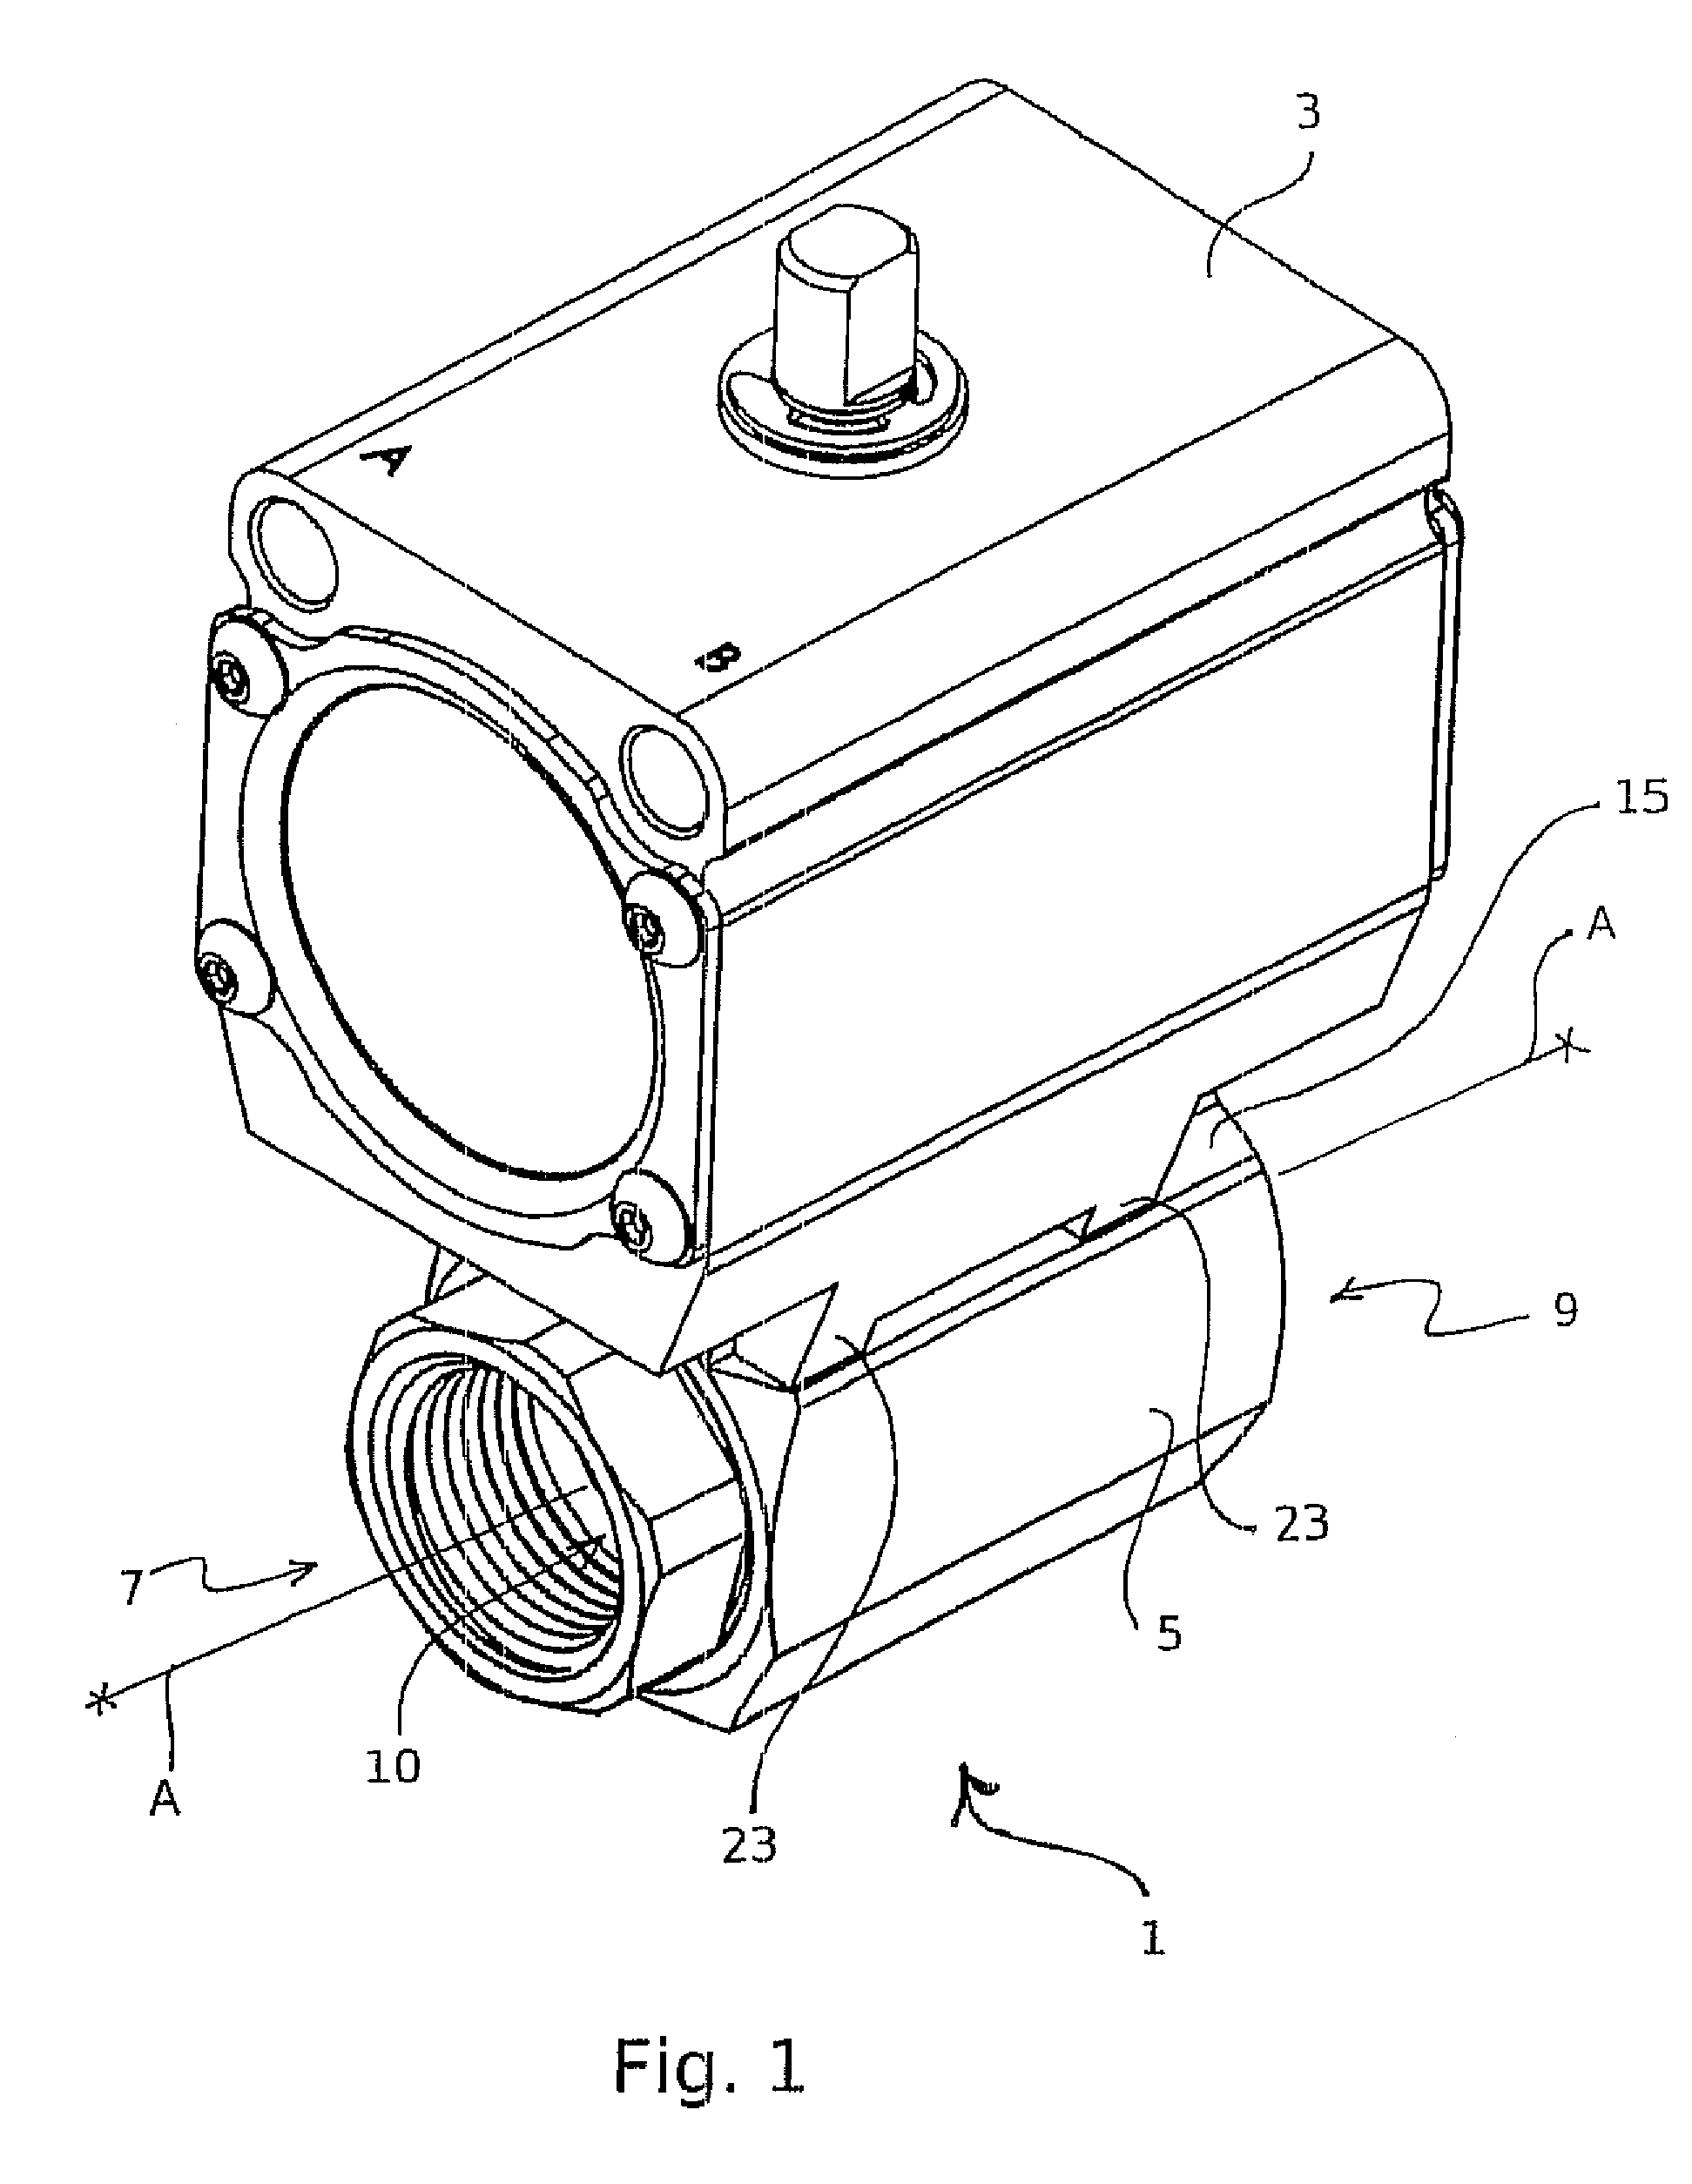 Automated ball valve and actuator